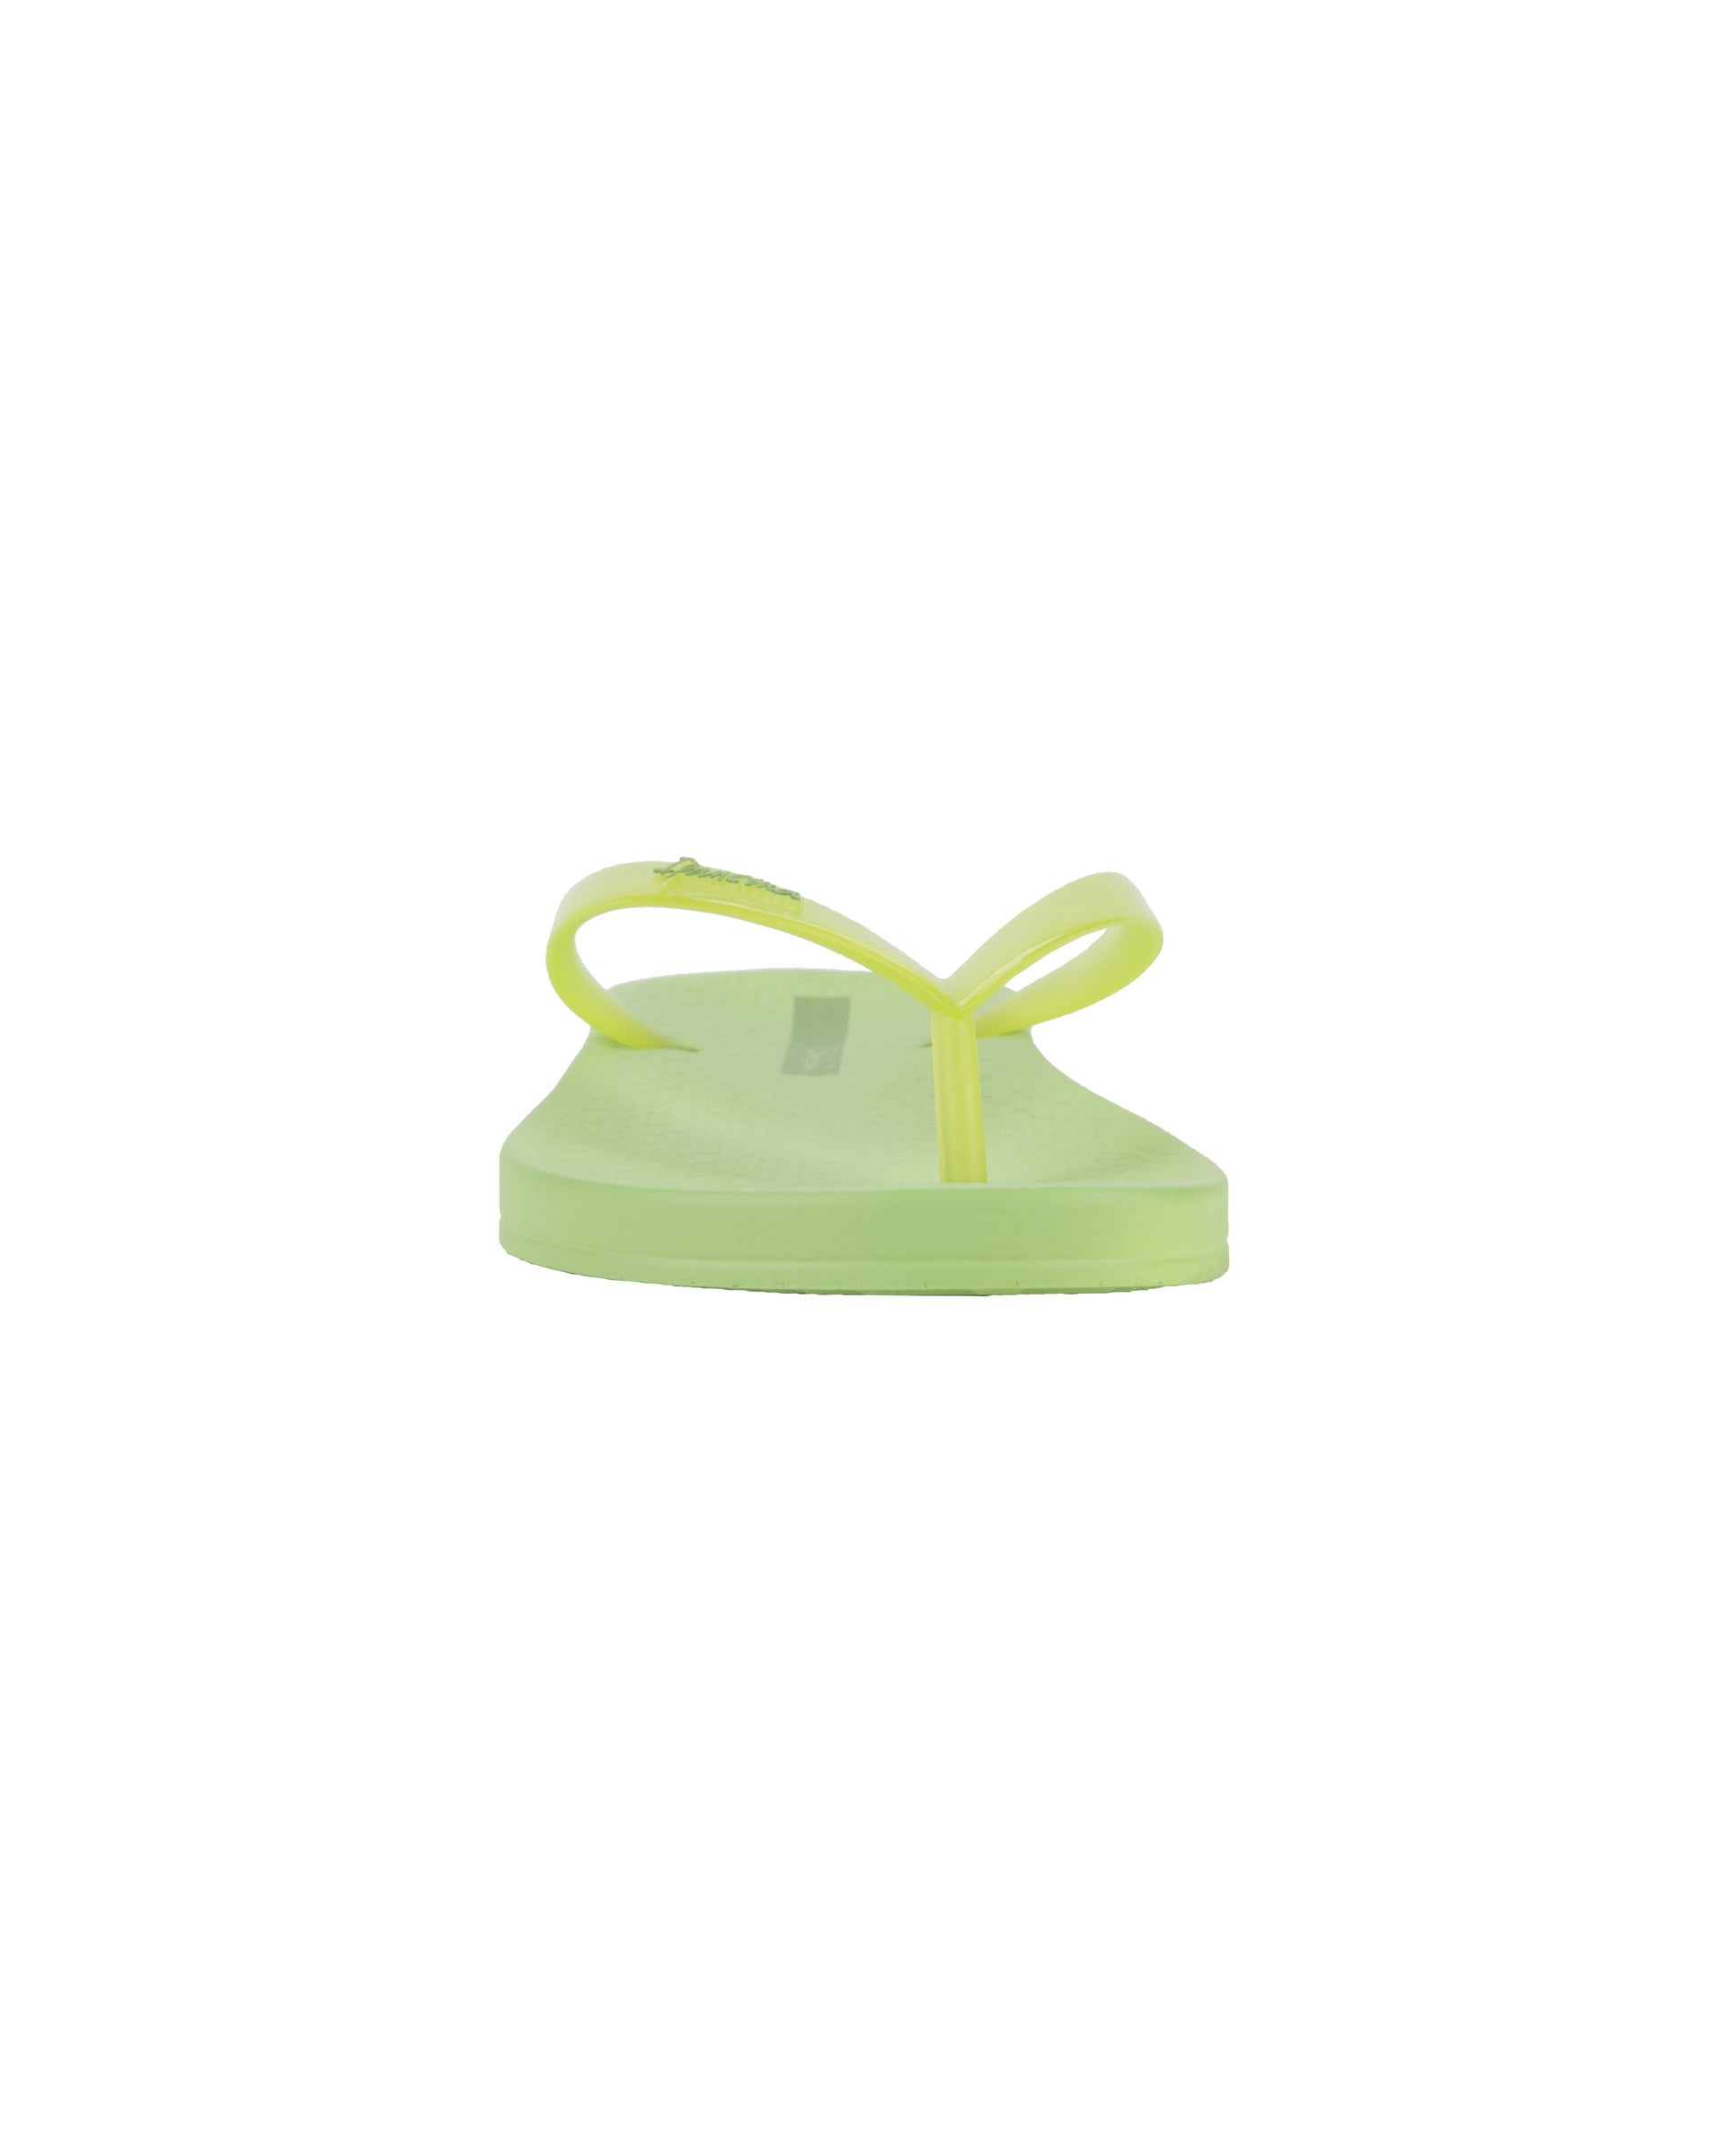 Front view of a green Ipanema Ana Connect women's flip flop with a clear green strap.